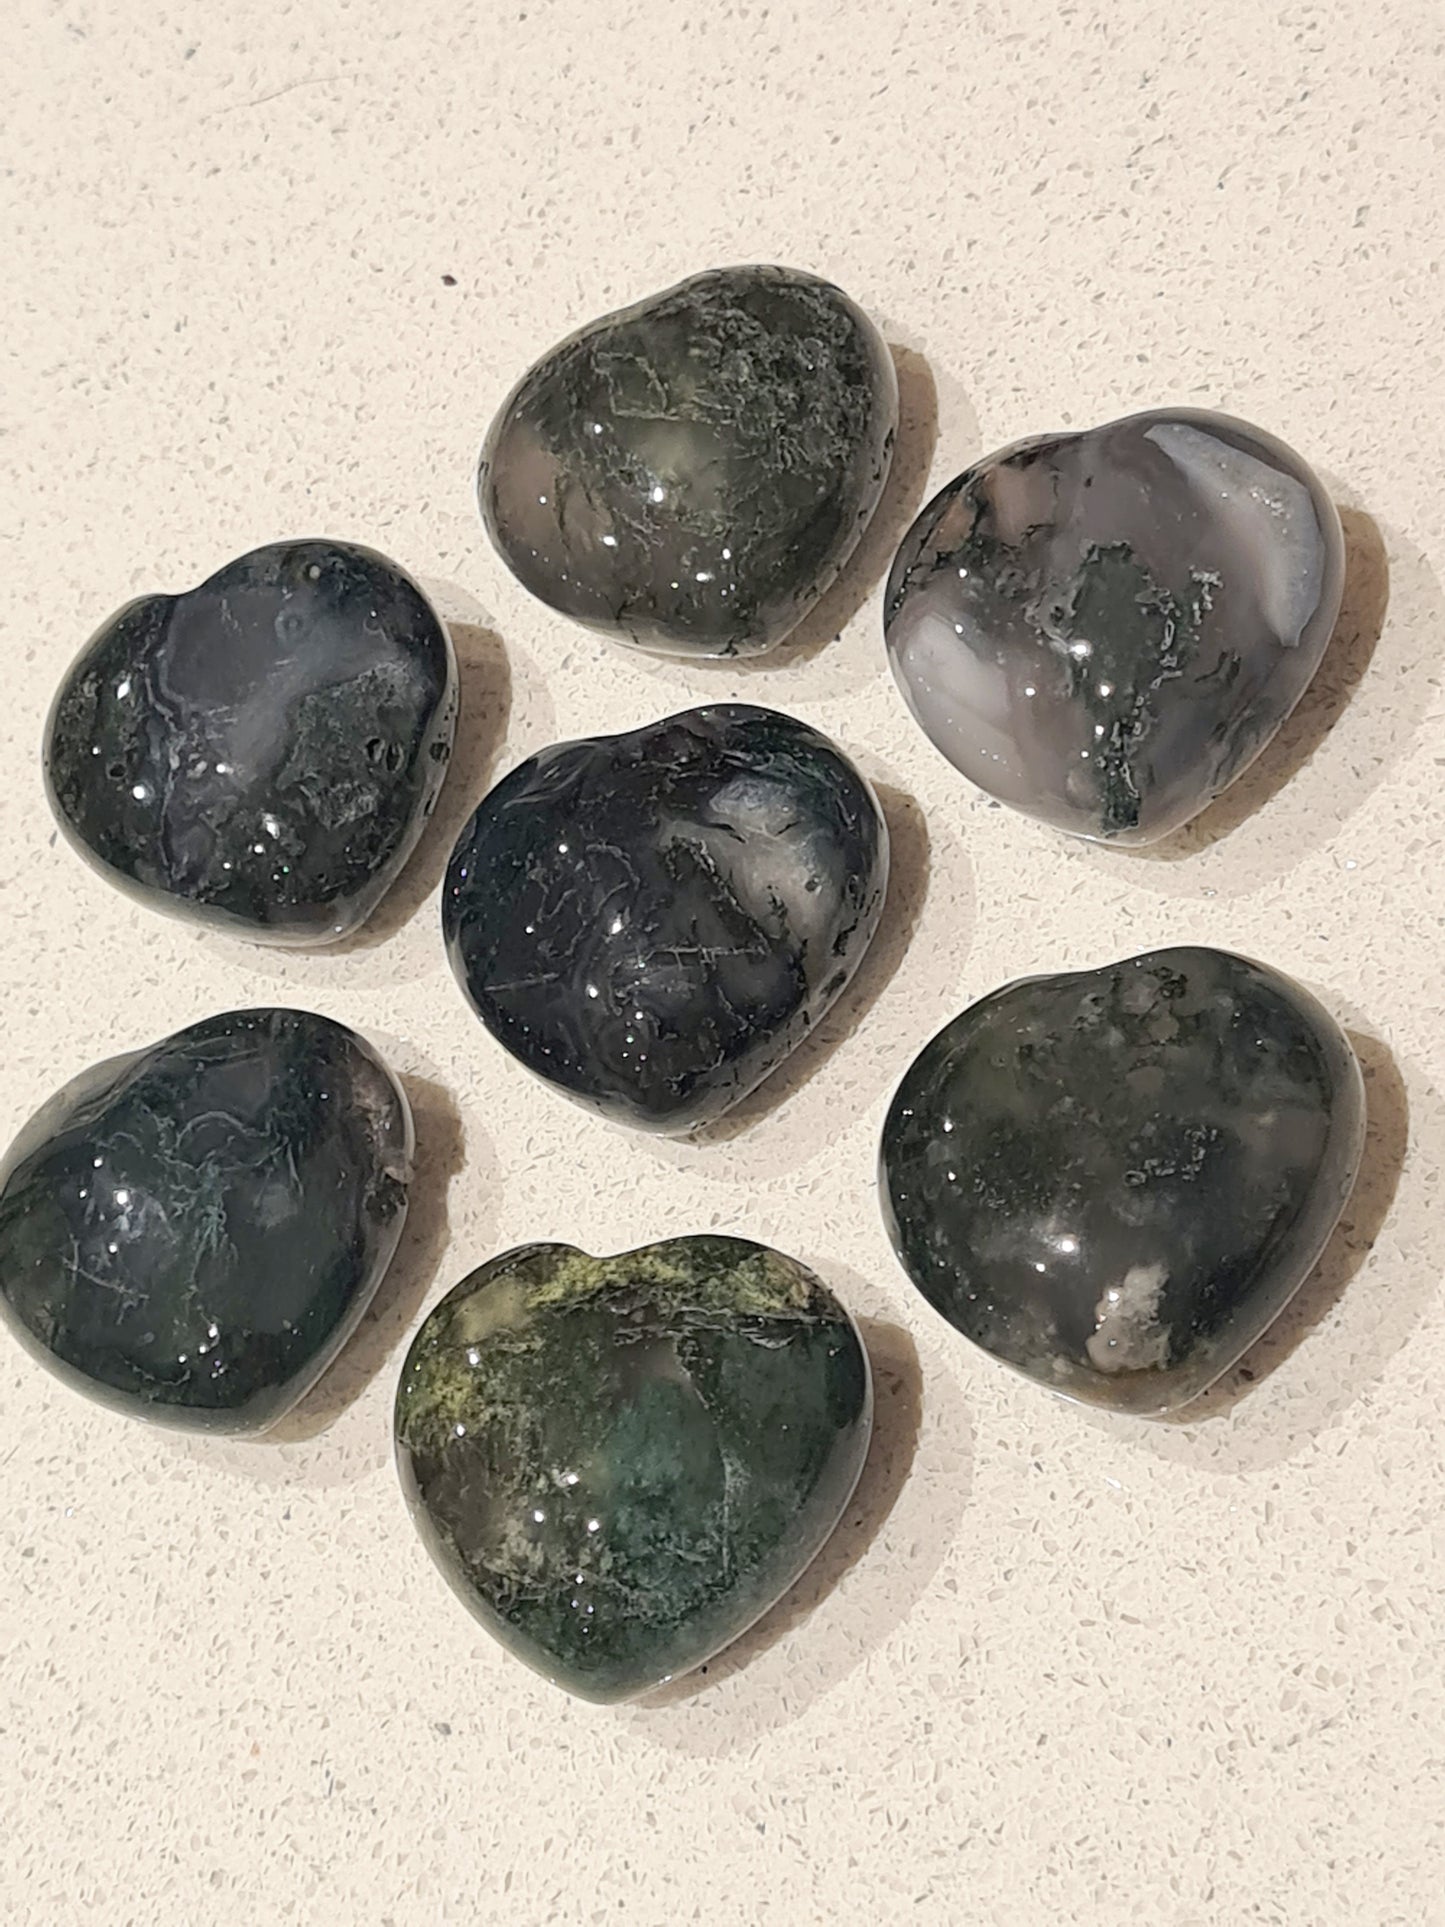 Seven Smooth Moss Agate Small Heart Crystal Carvings set out in a daisy formation on a white background